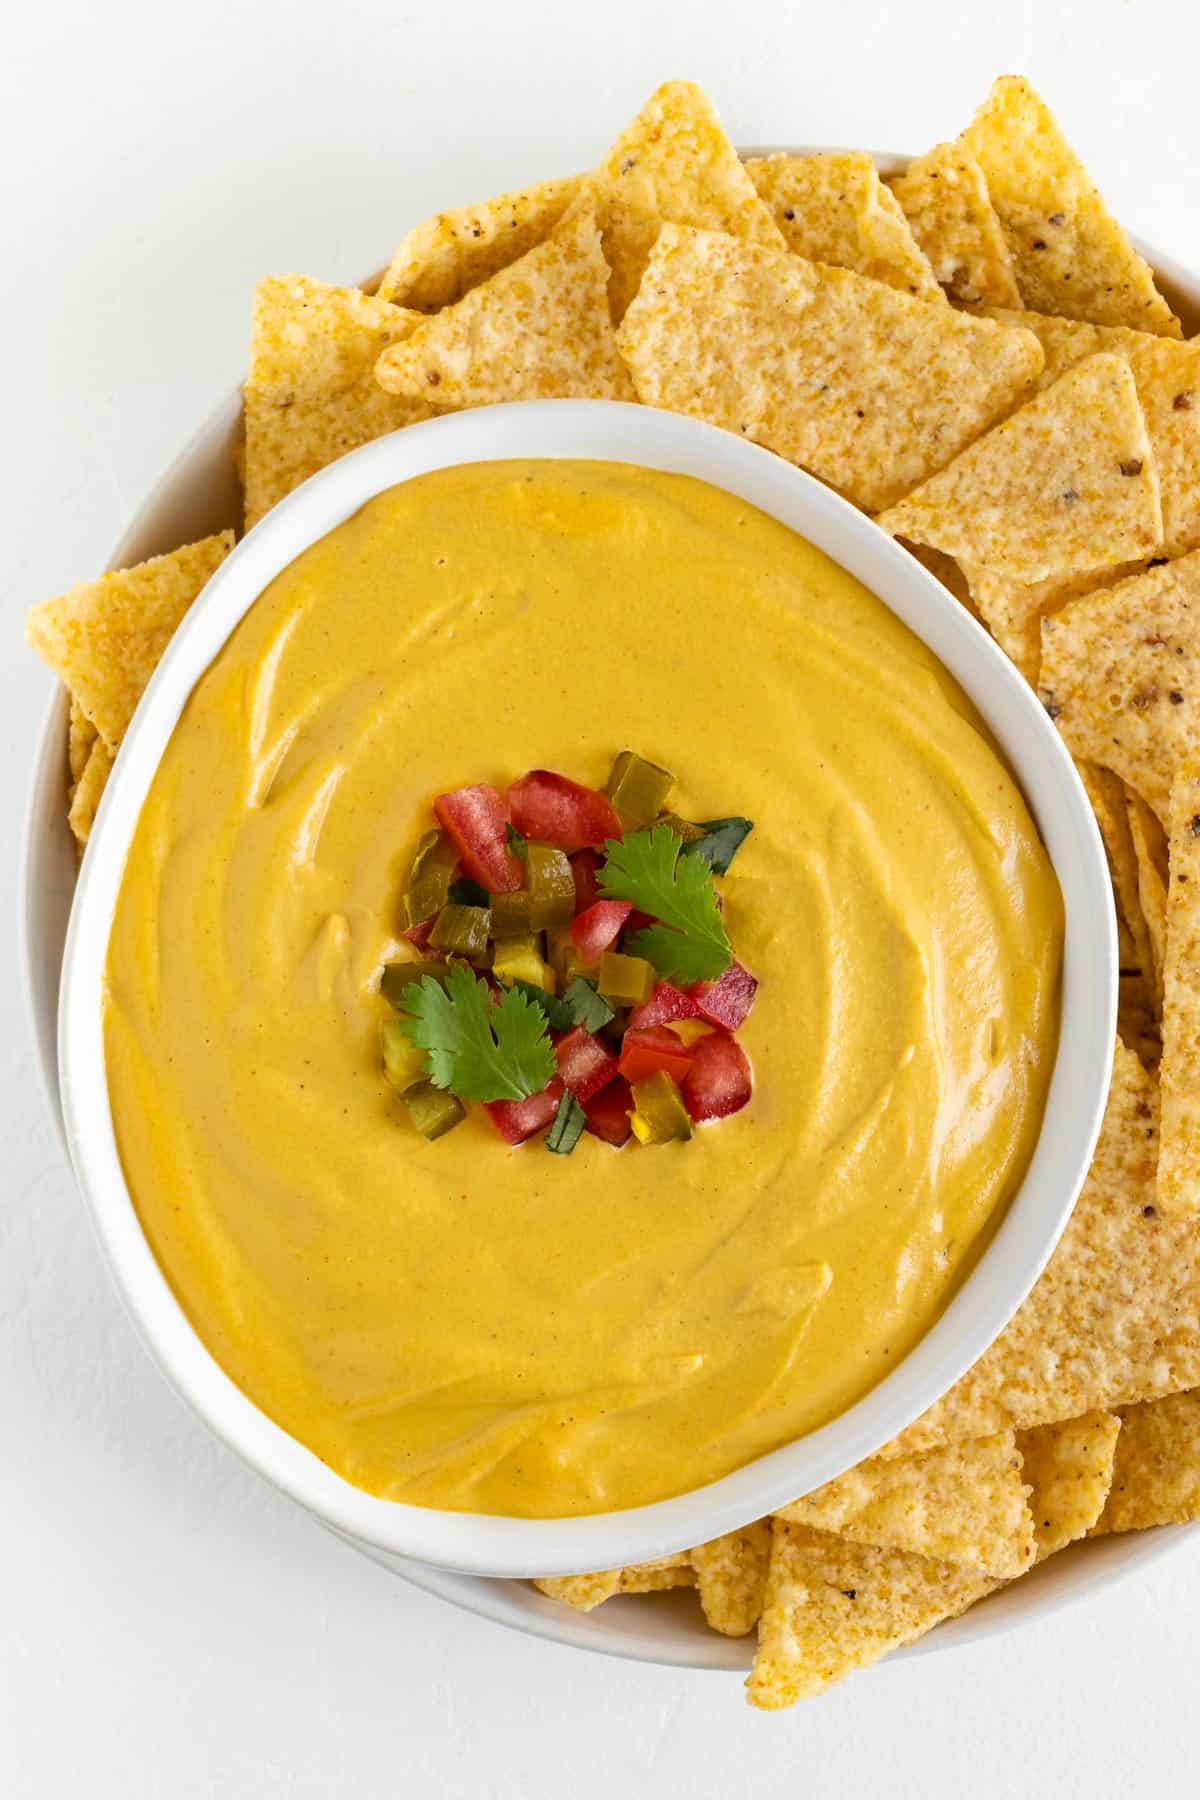 a bowl of vegan nacho cheese garnished with diced jalapeño, tomato, and cilantro beside corn tortilla chips